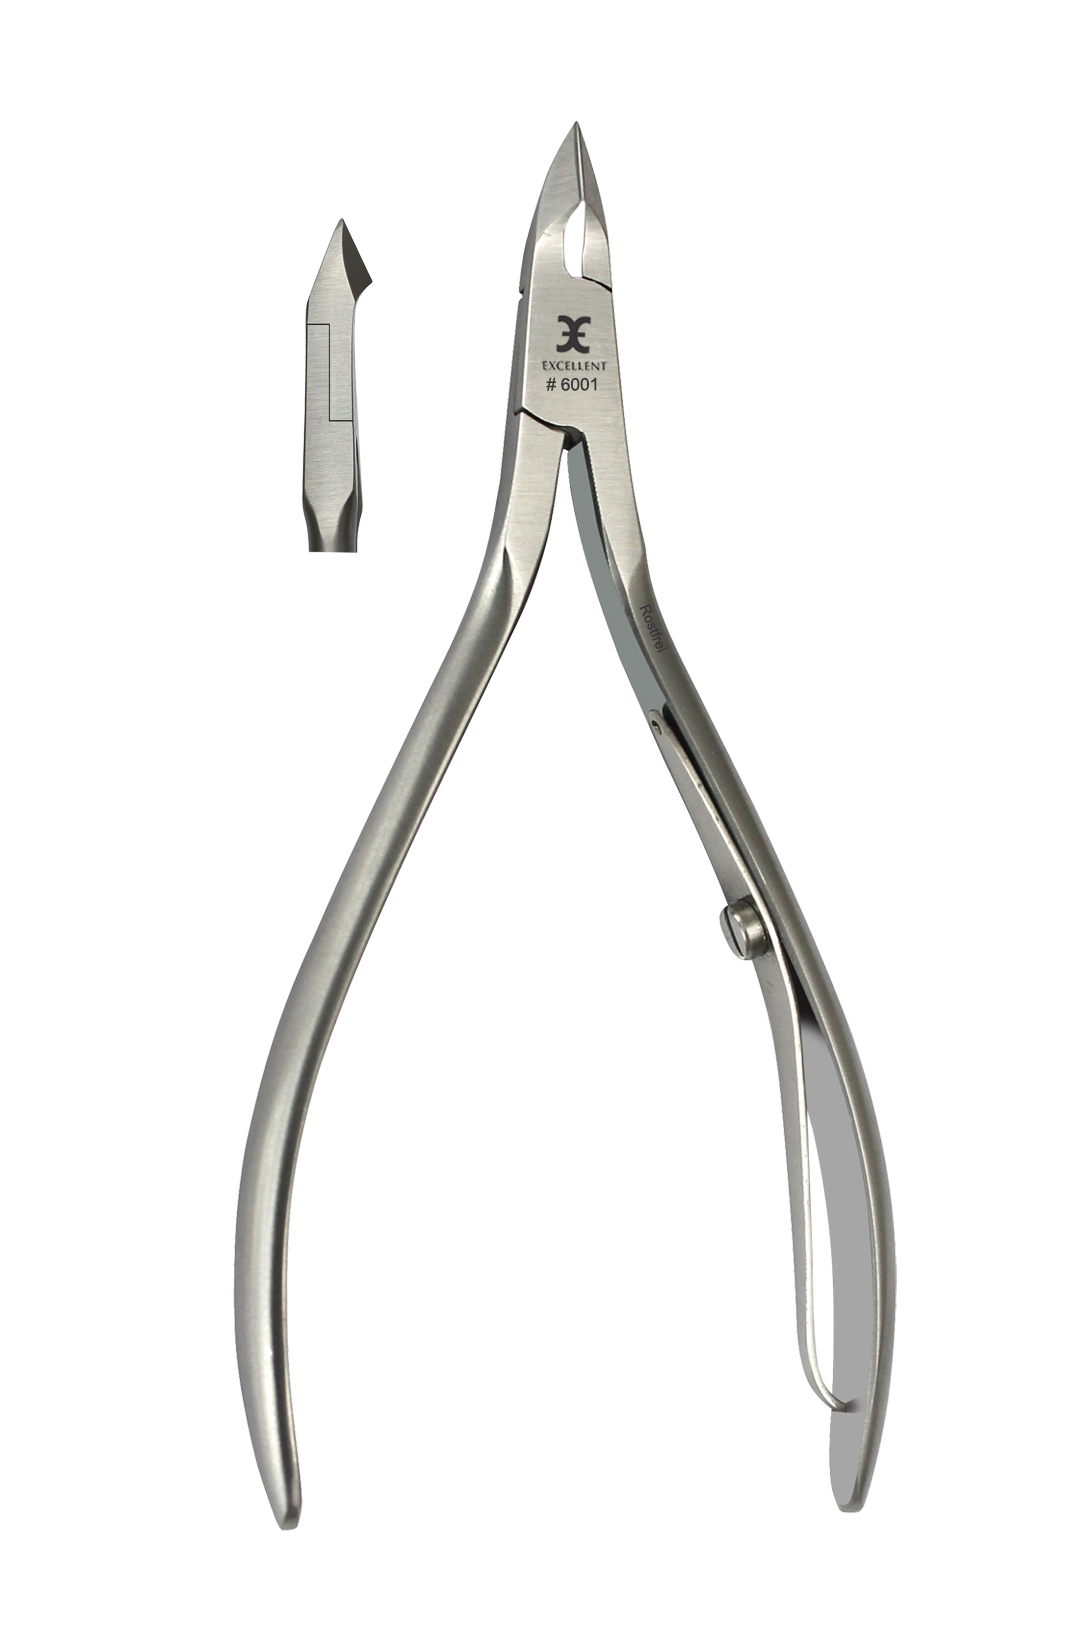 Excellent cuticle nippers 10 cm, cutting edge 6 mm